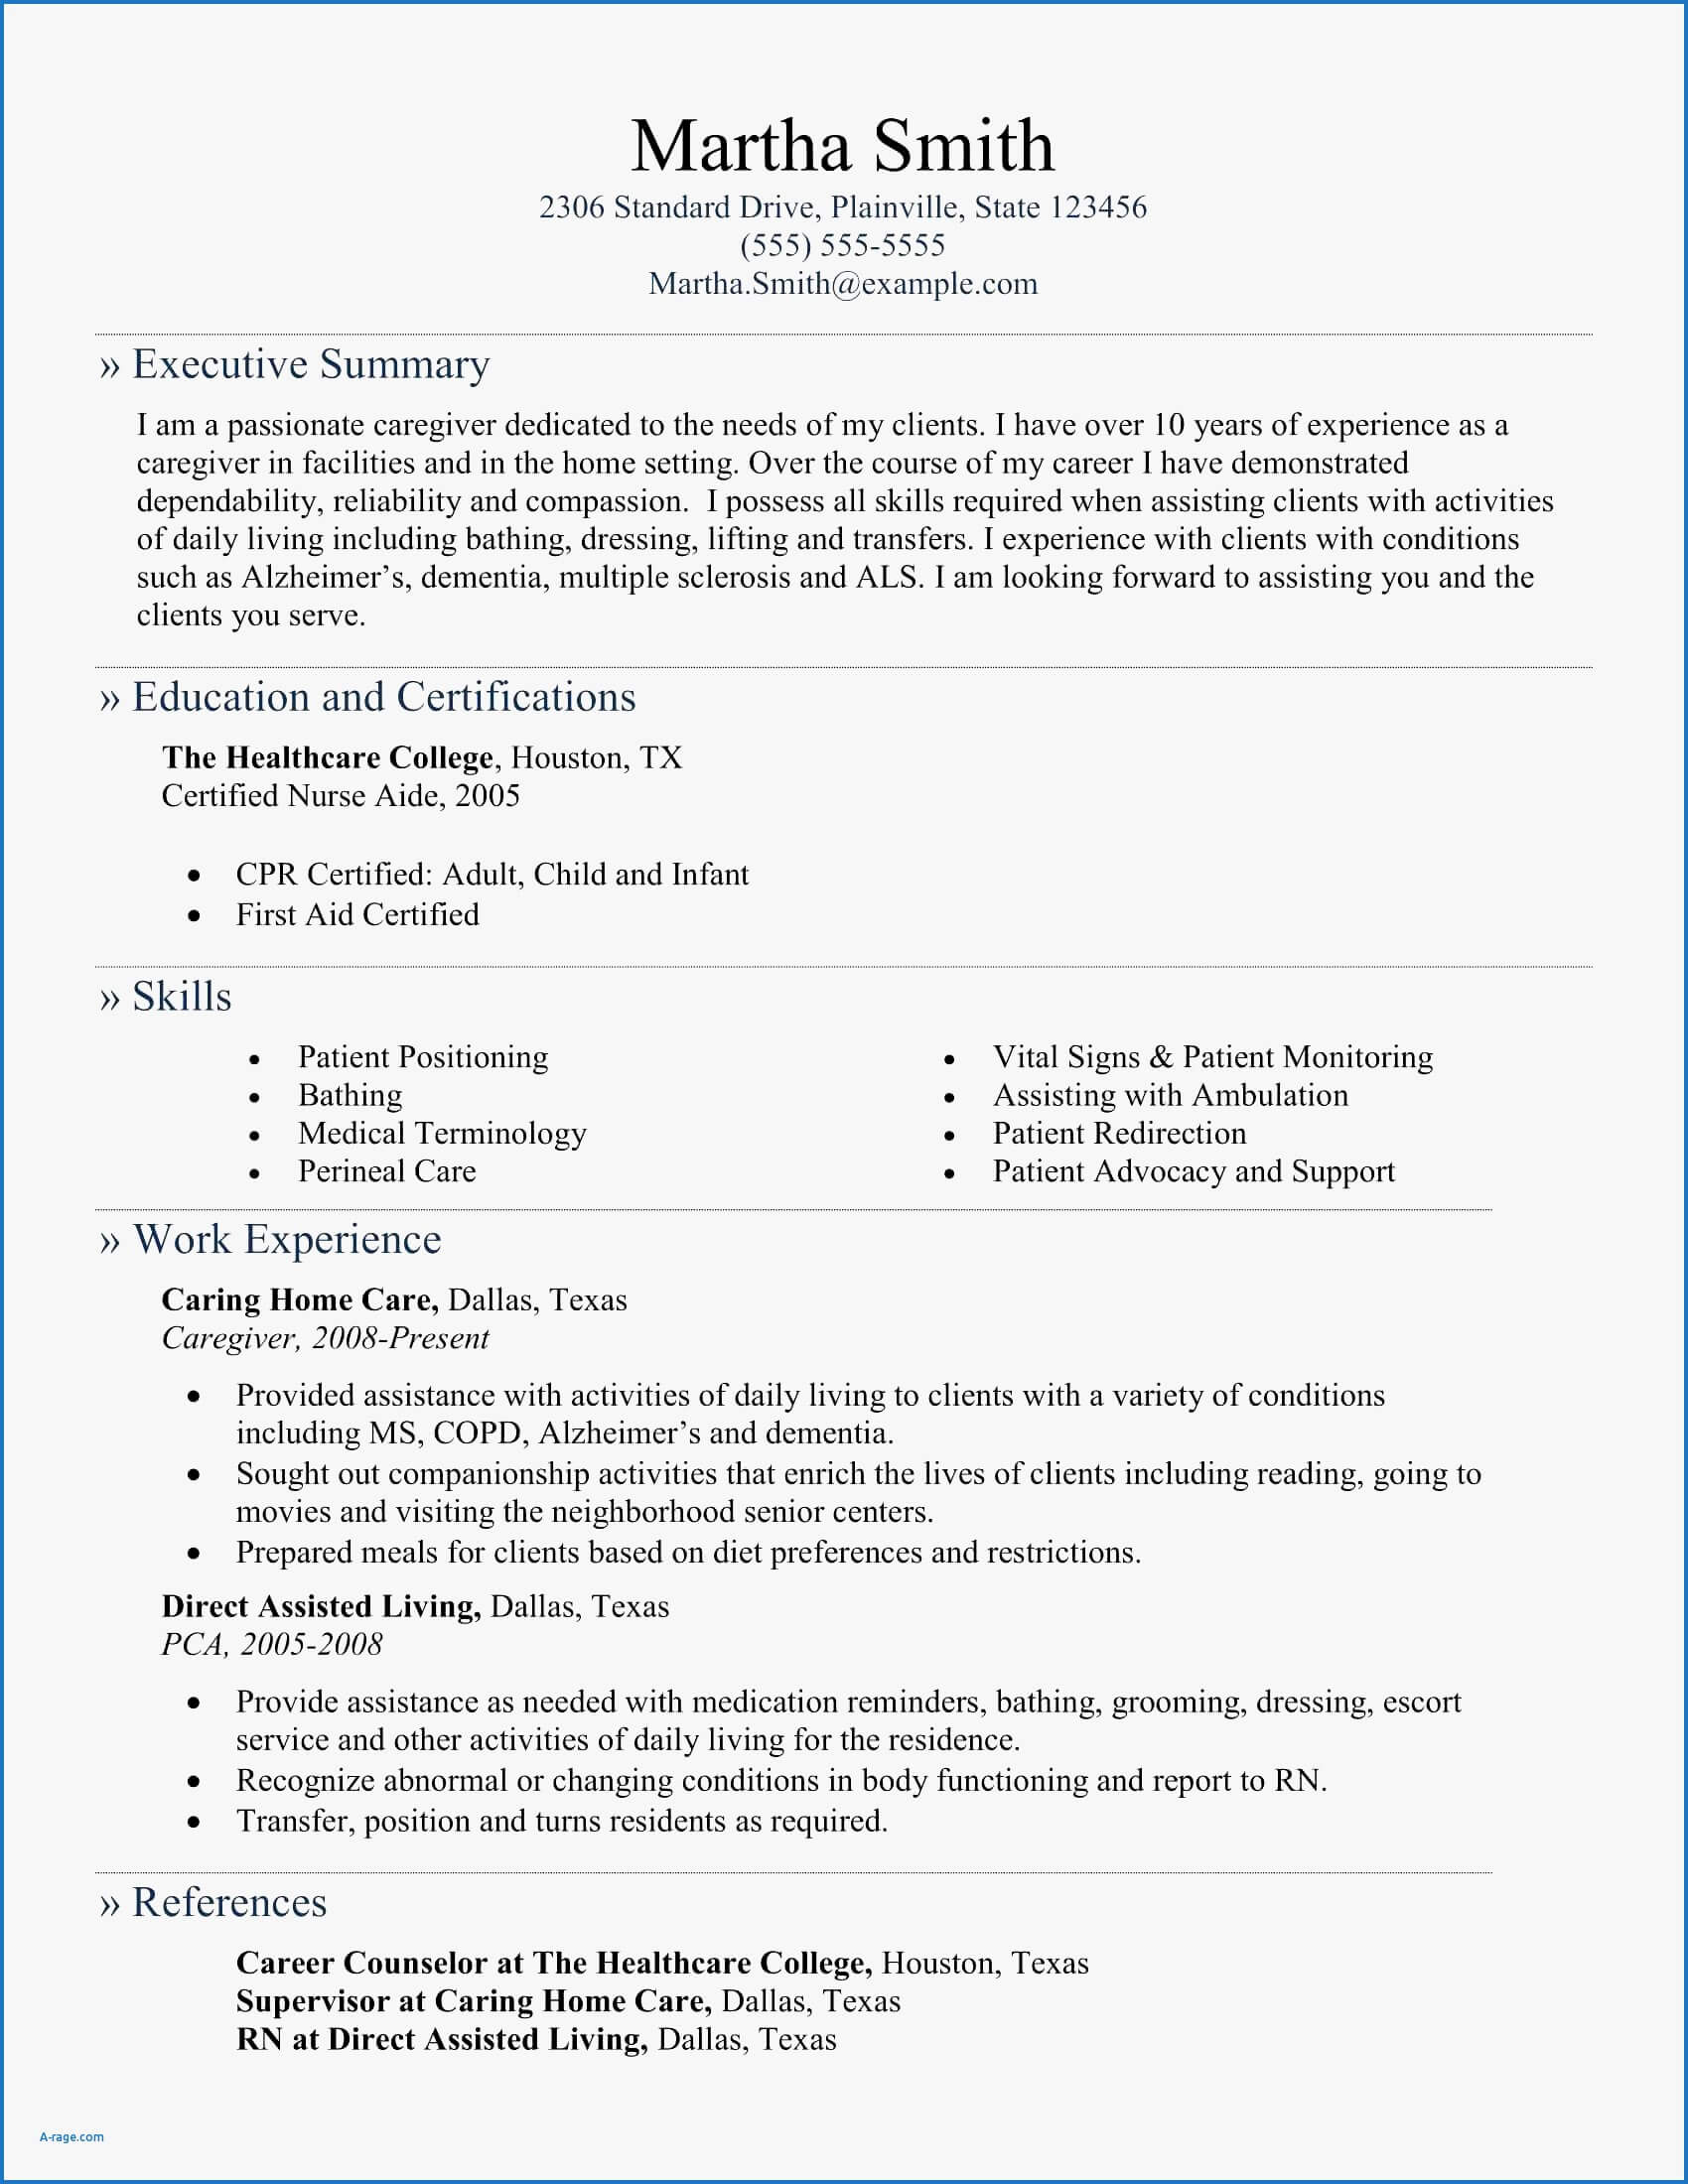 Nutritional Advisor Cover Letter New Clinical Counselor Pertaining To Community Service Template Word